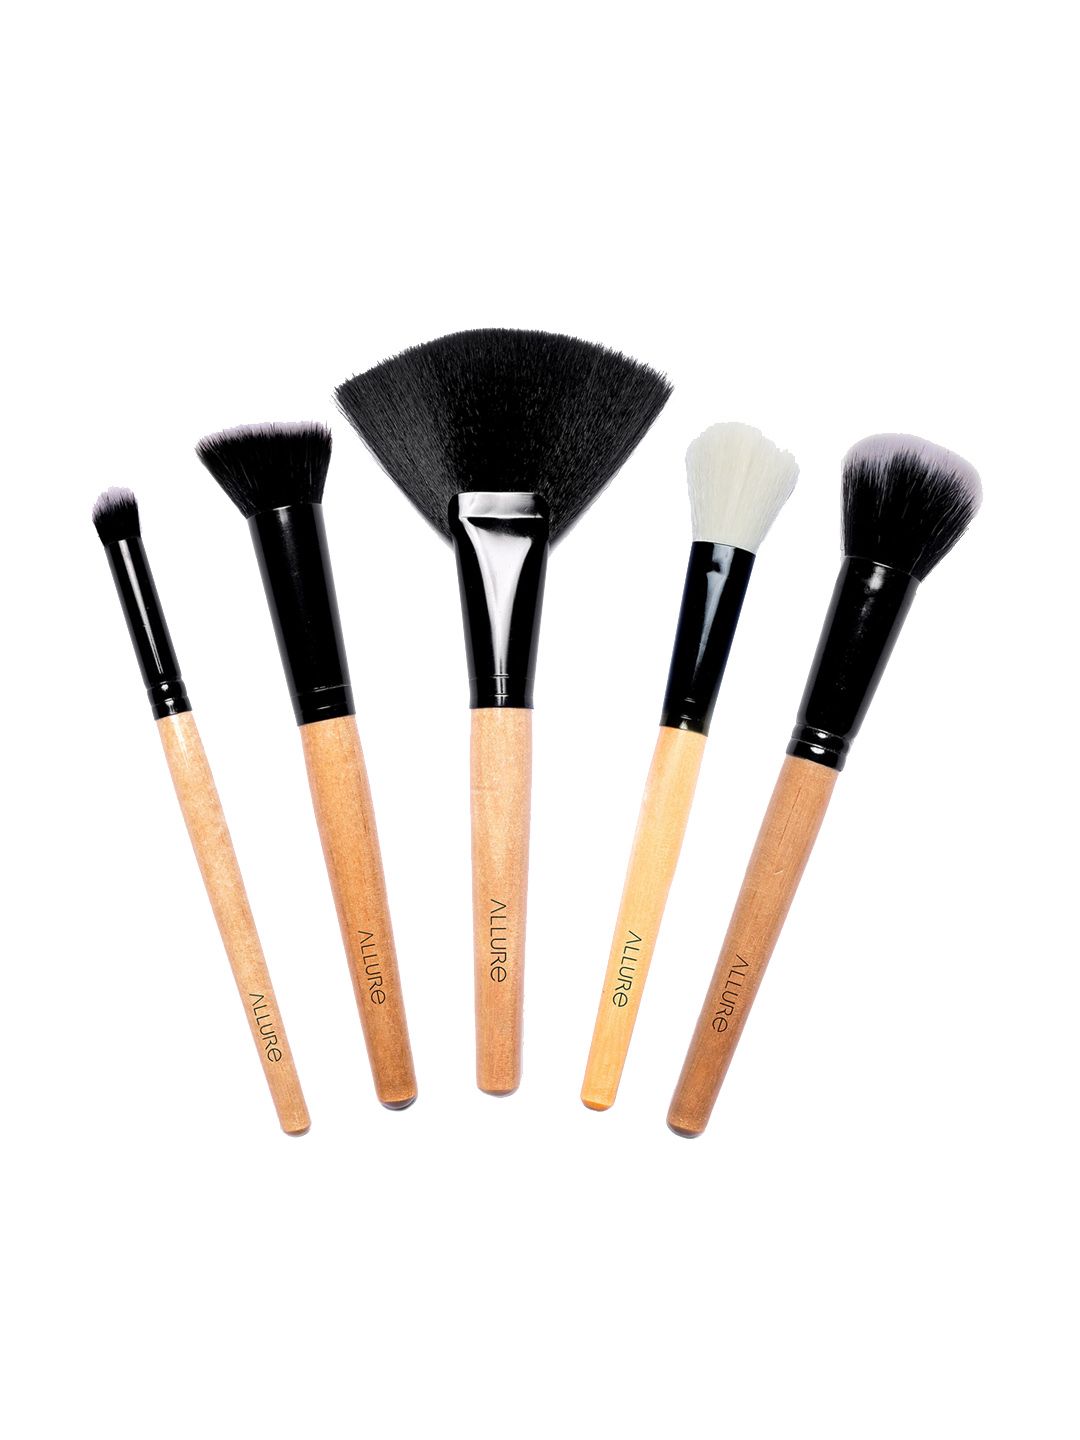 ALLURE Set of 5 Wooden Face Makeup Brushes ACKF2-05 Price in India